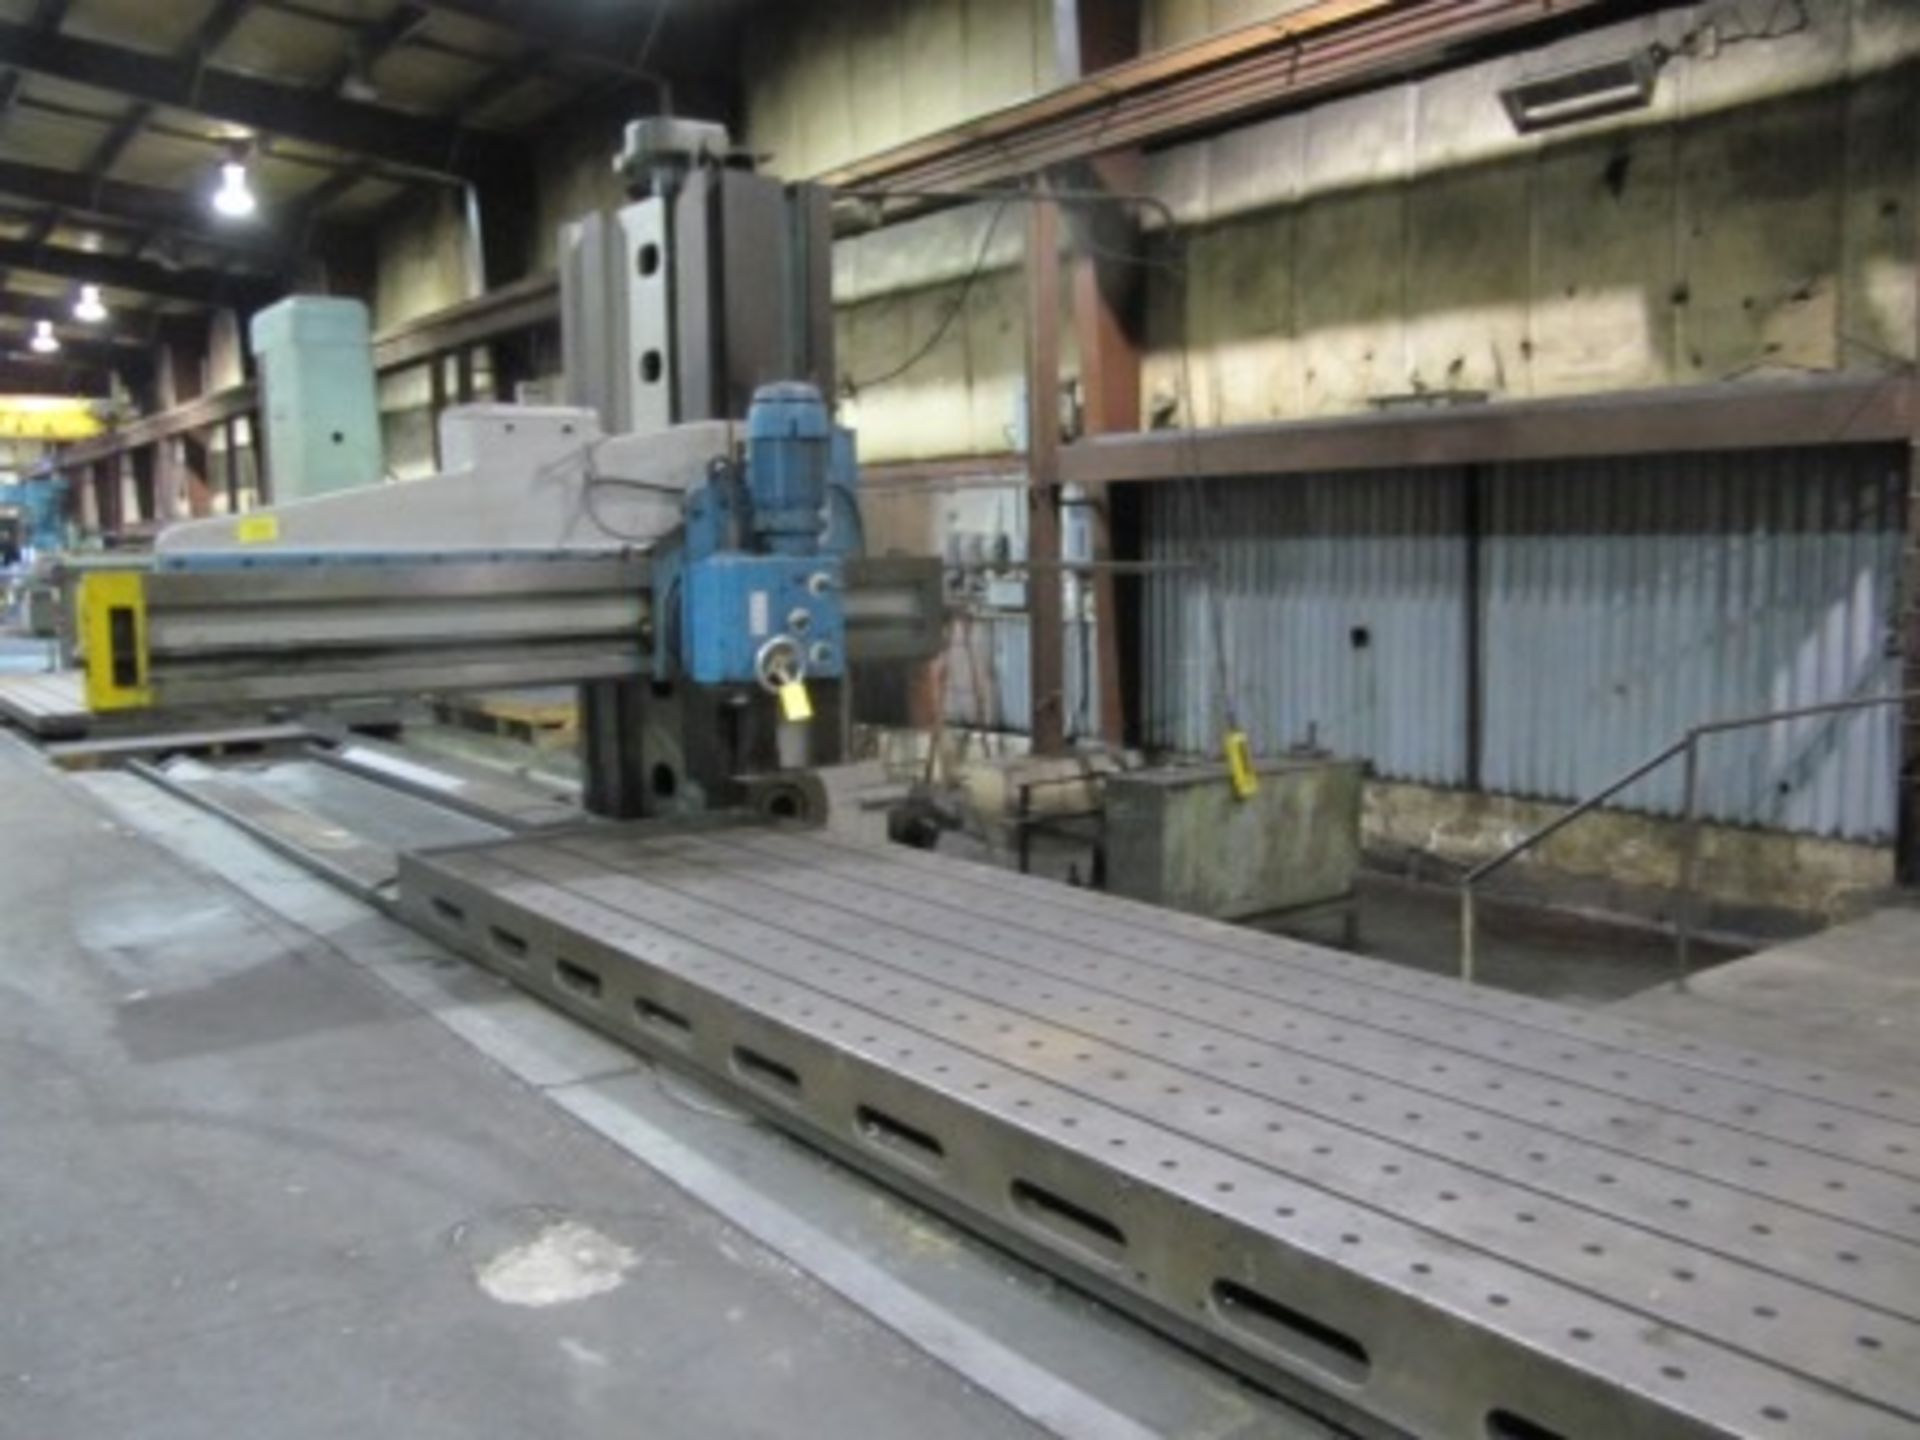 BERTRAM OPEN SIDED PLANER MILL, 242"X66" TABLE, TRAVELS: X-235", Y-65", Z-90", SPEEDS TO 1920 RPM,